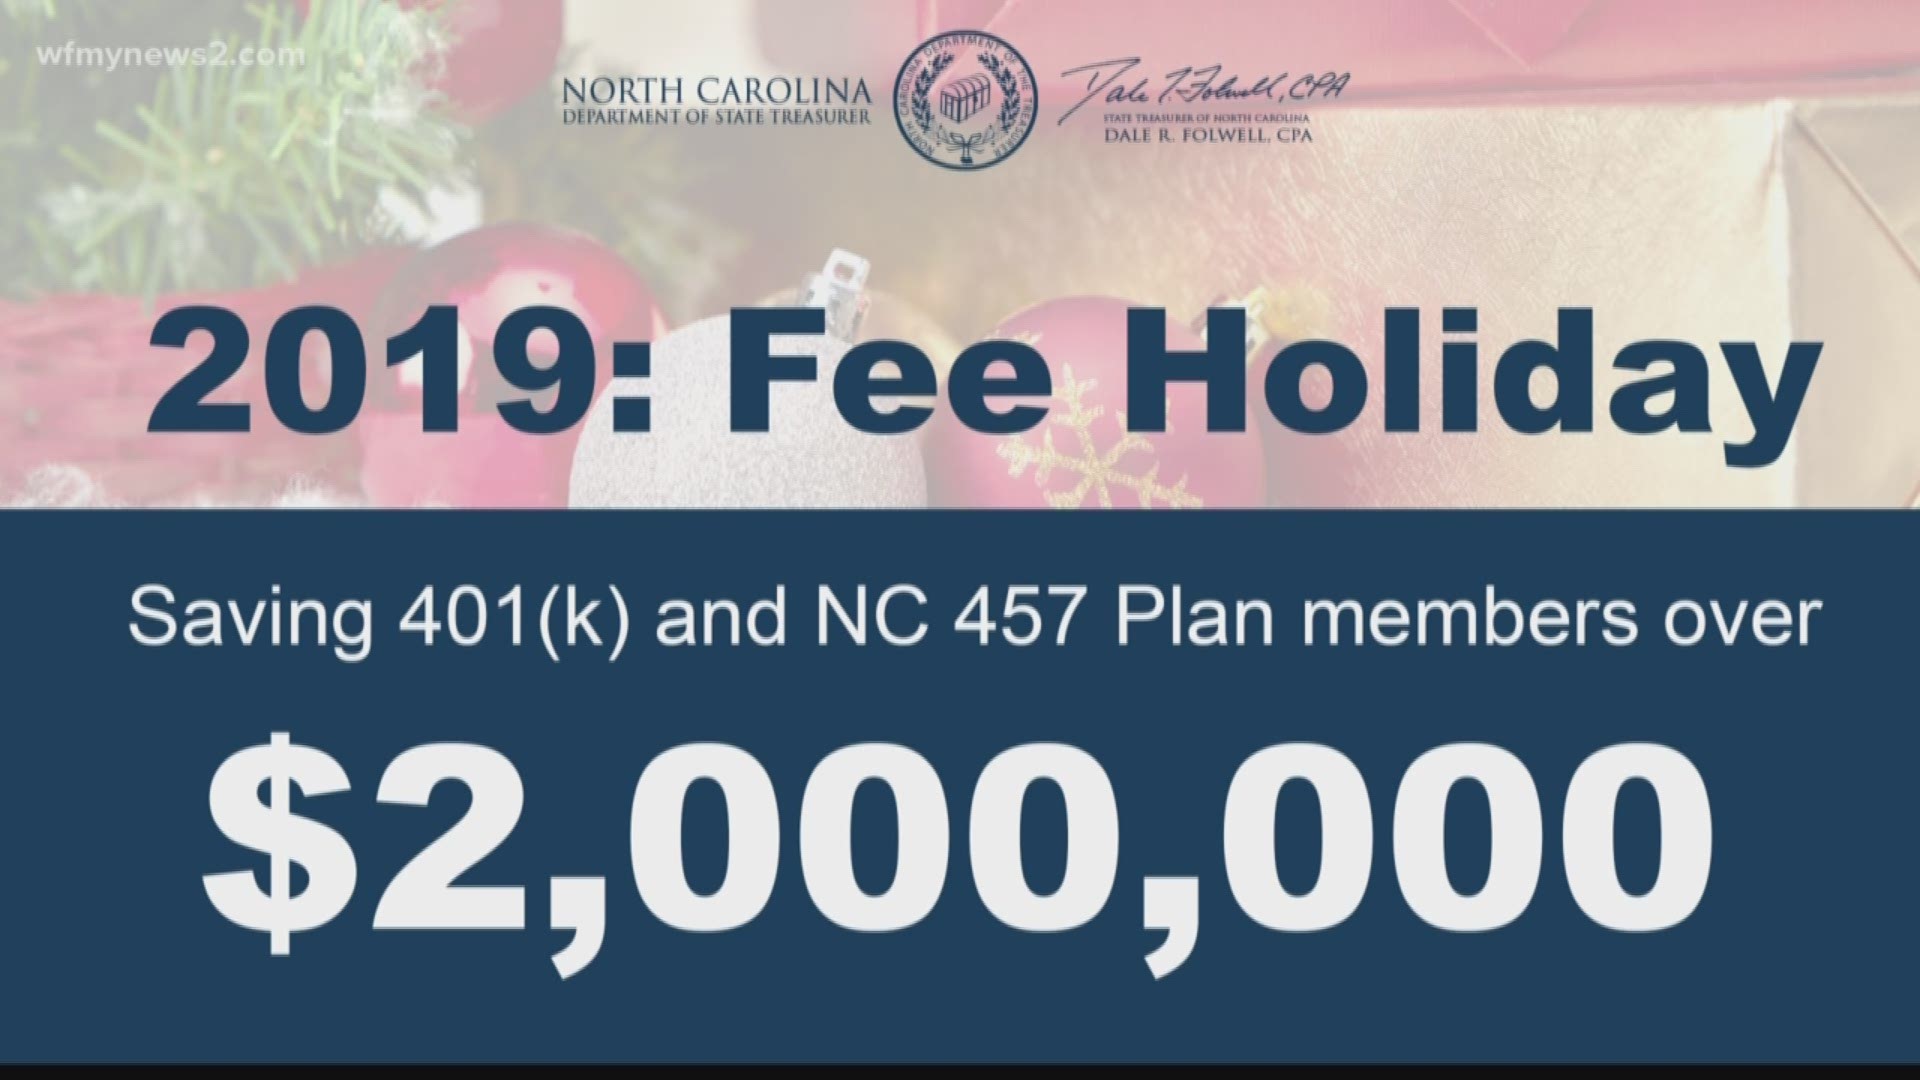 The NC State Treasurer is waiving certain fees for state employees saving for retirement.